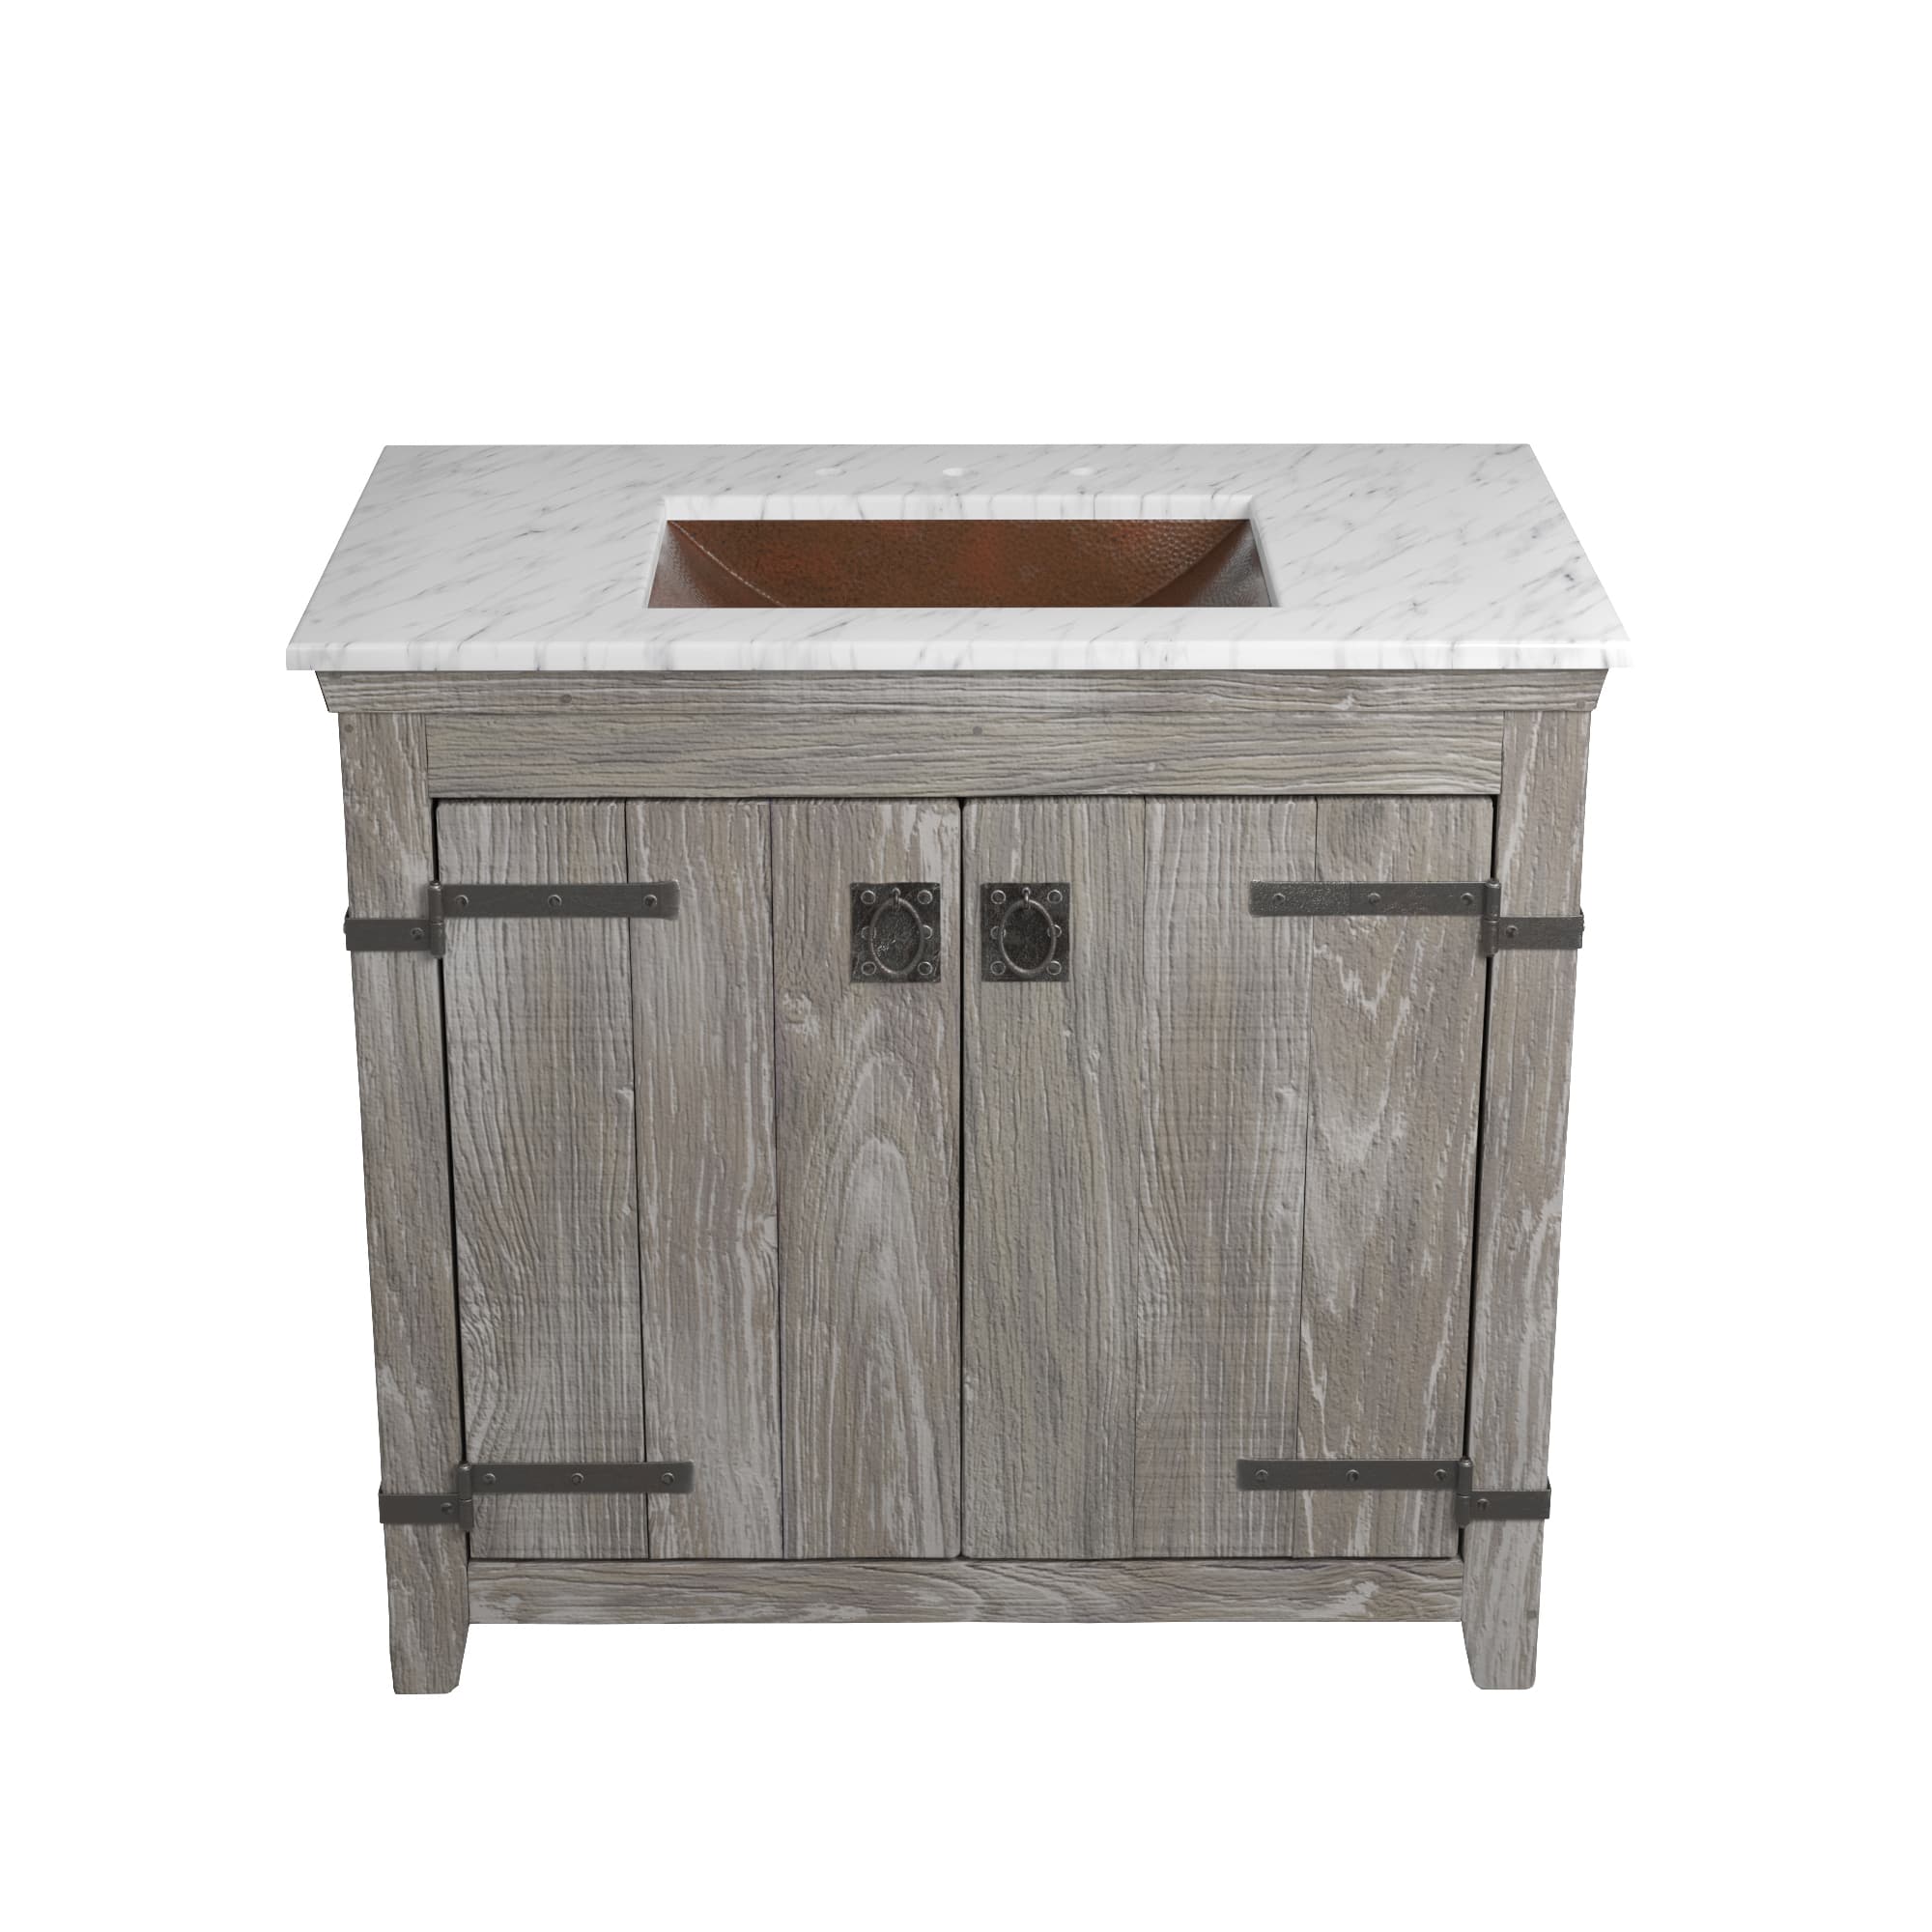 Native Trails 36" Americana Vanity in Driftwood with Carrara Marble Top and Avila in Antique, 8" Widespread Faucet Holes, BND36-VB-CT-CP-008